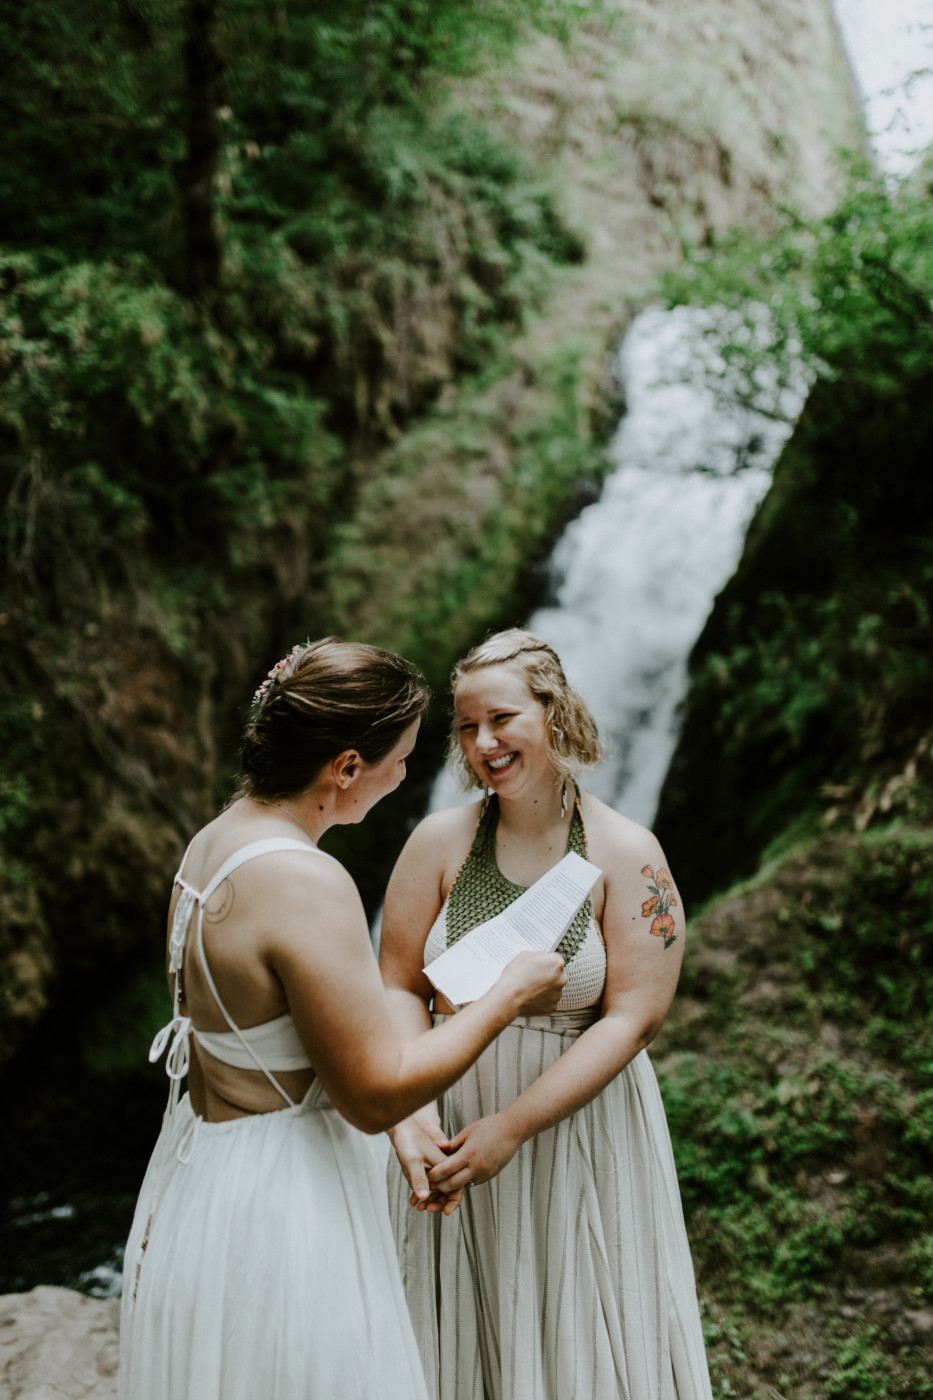 Audrey reads her vows to Kate. Elopement wedding photography at Bridal Veil Falls by Sienna Plus Josh.